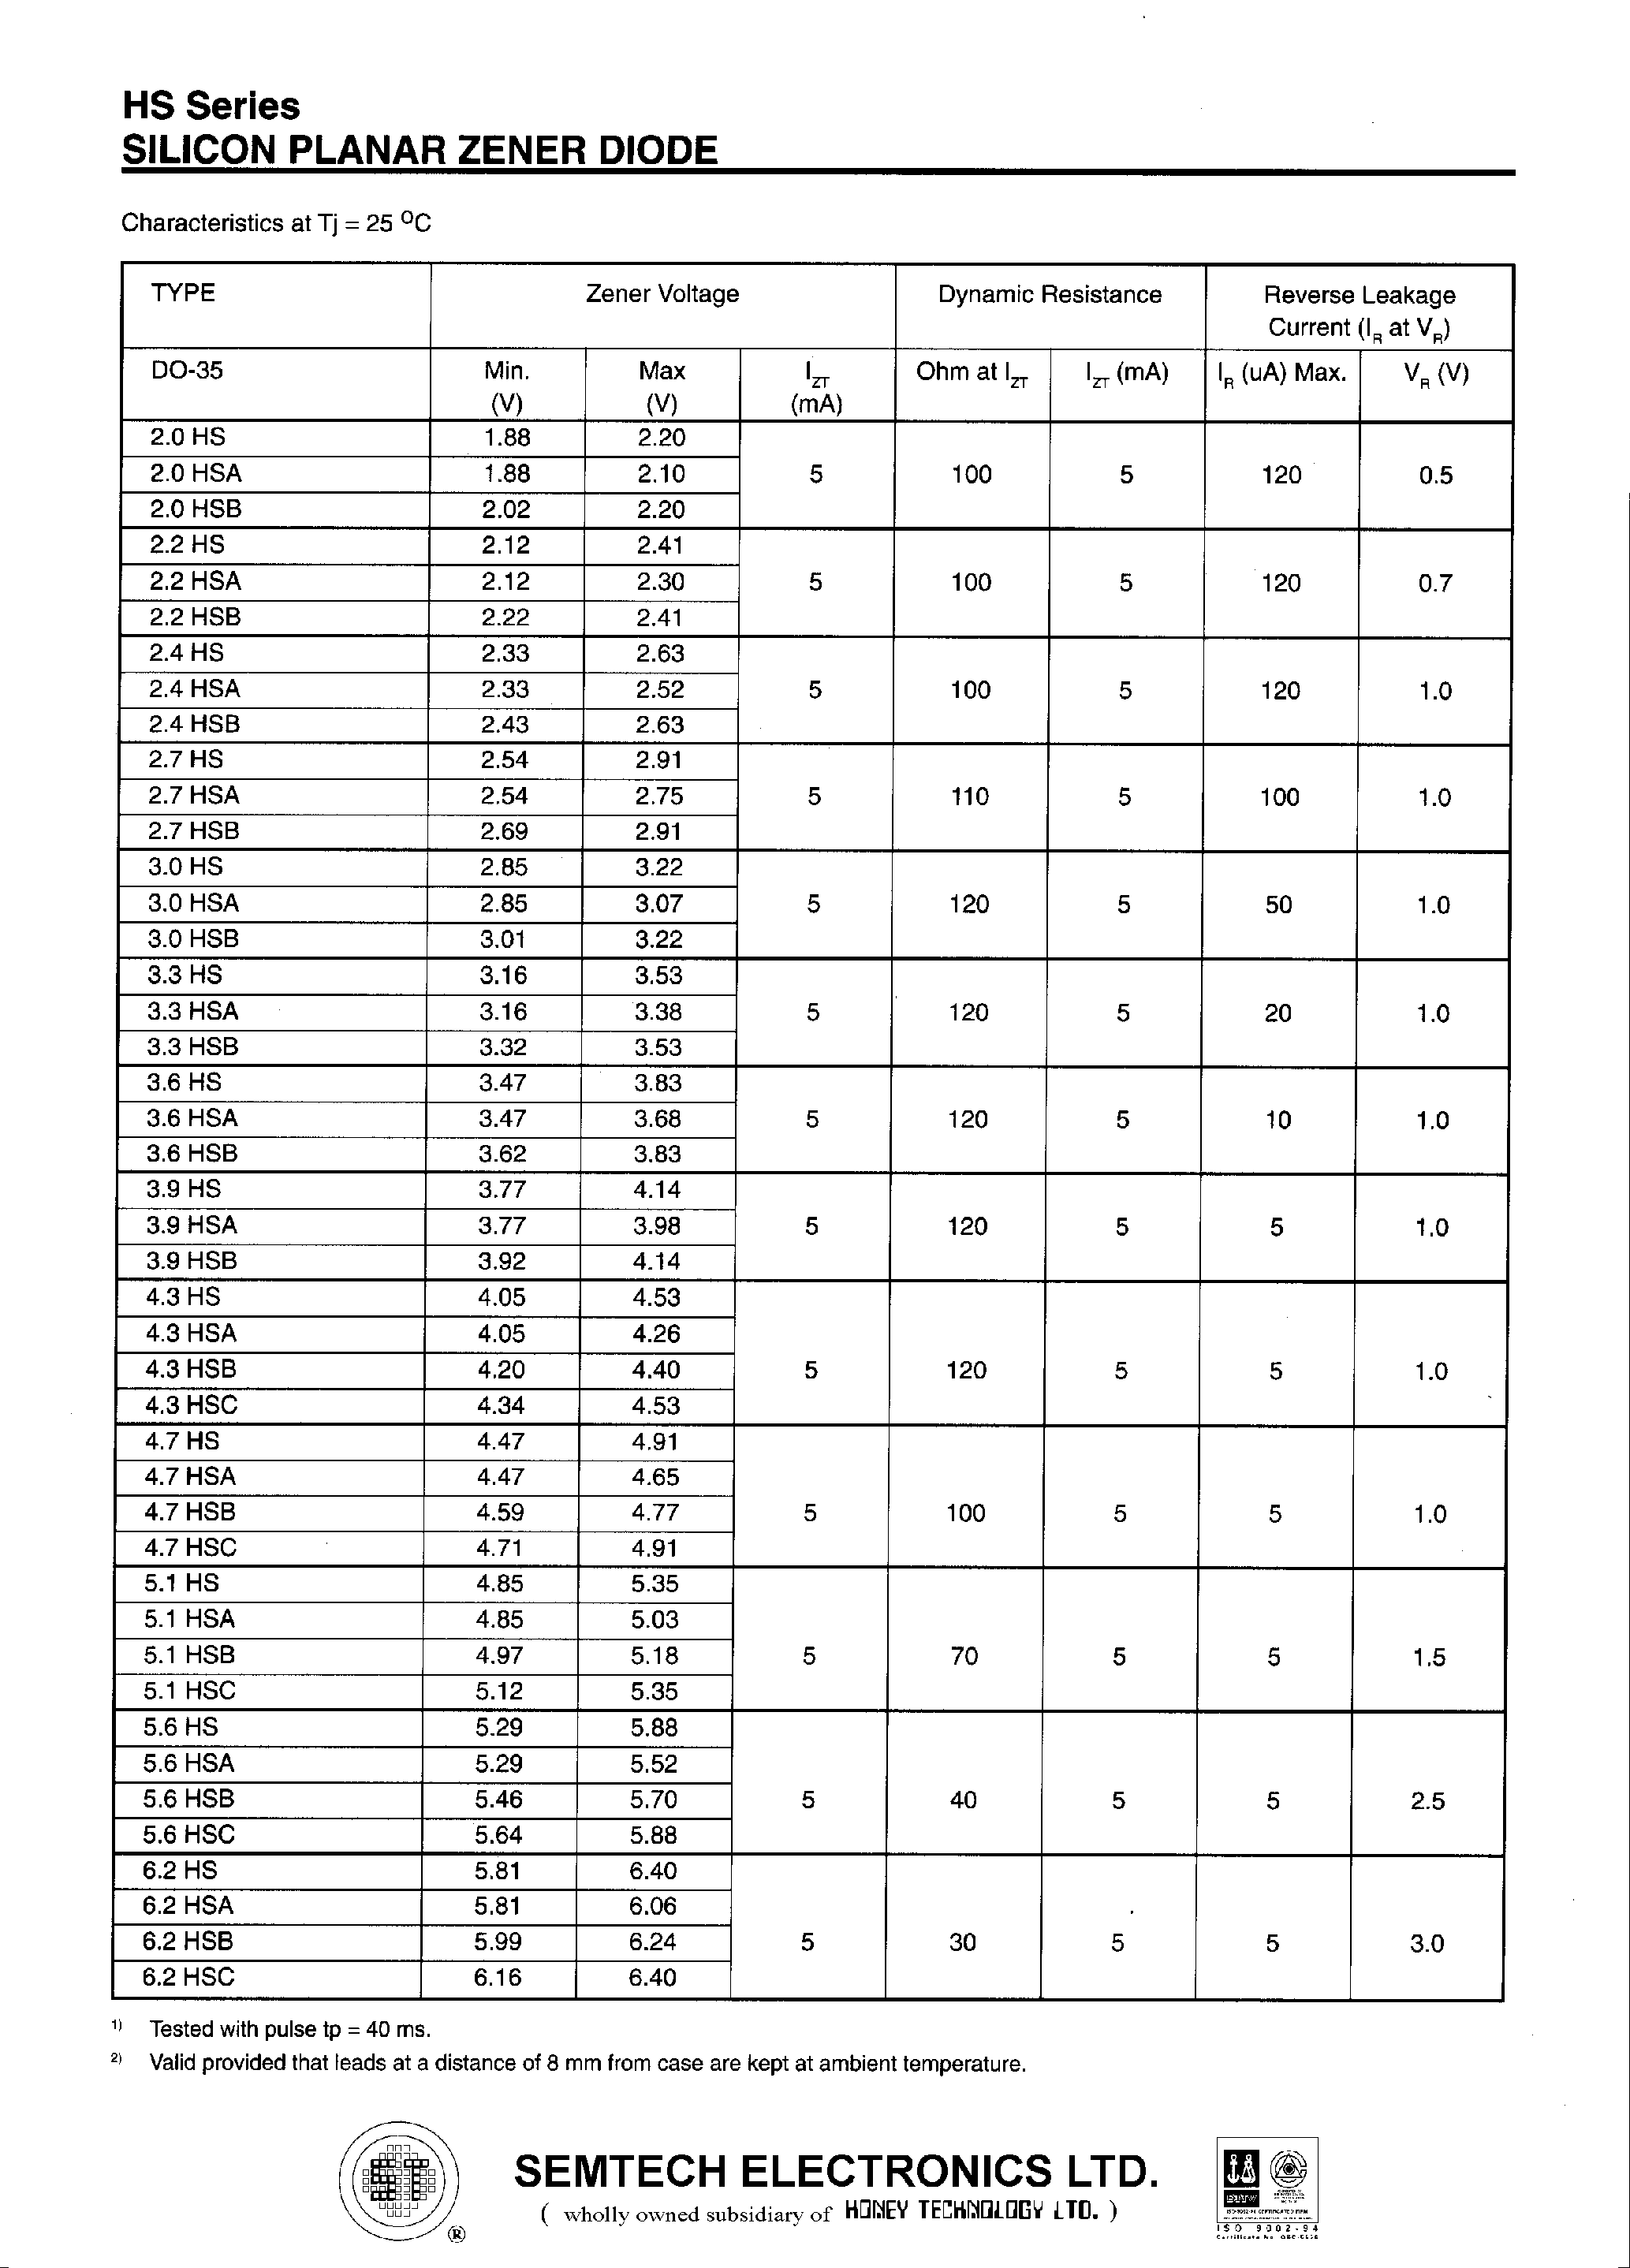 Datasheet 6.8HS - SILICON PLANAR ZENER DIODE page 2